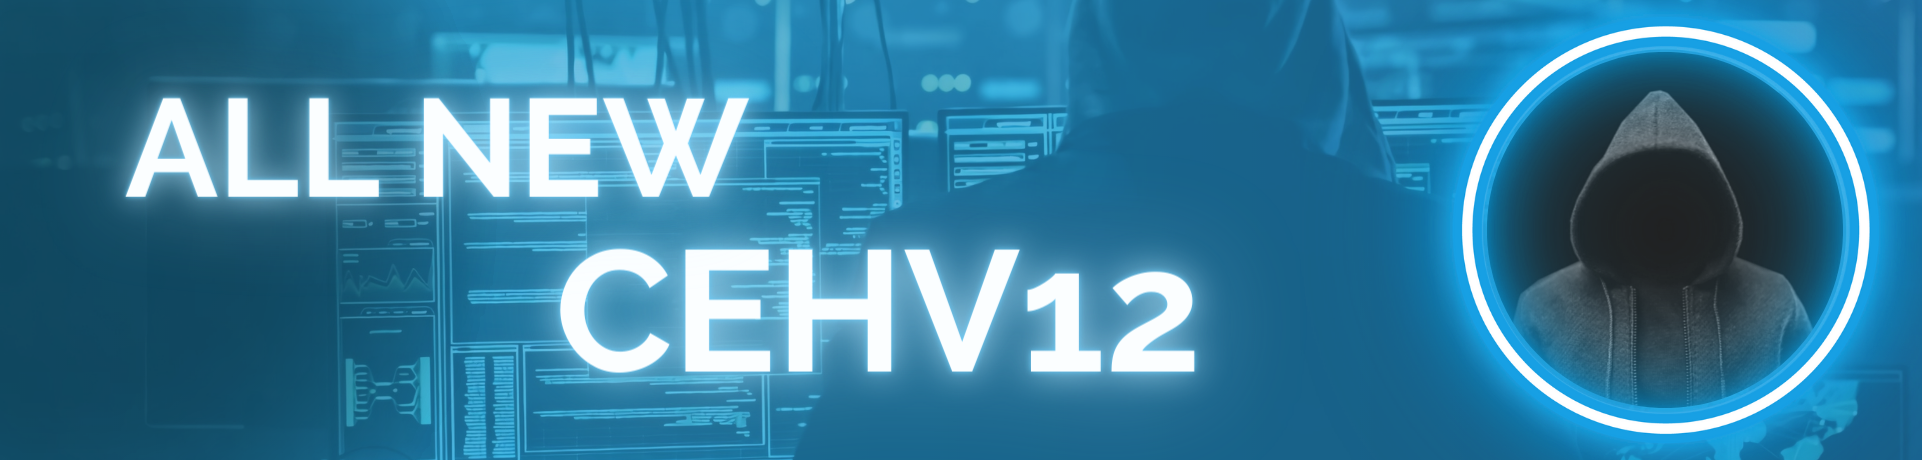 Everything you need to know about the new certfied ethical hacker v12 featured image